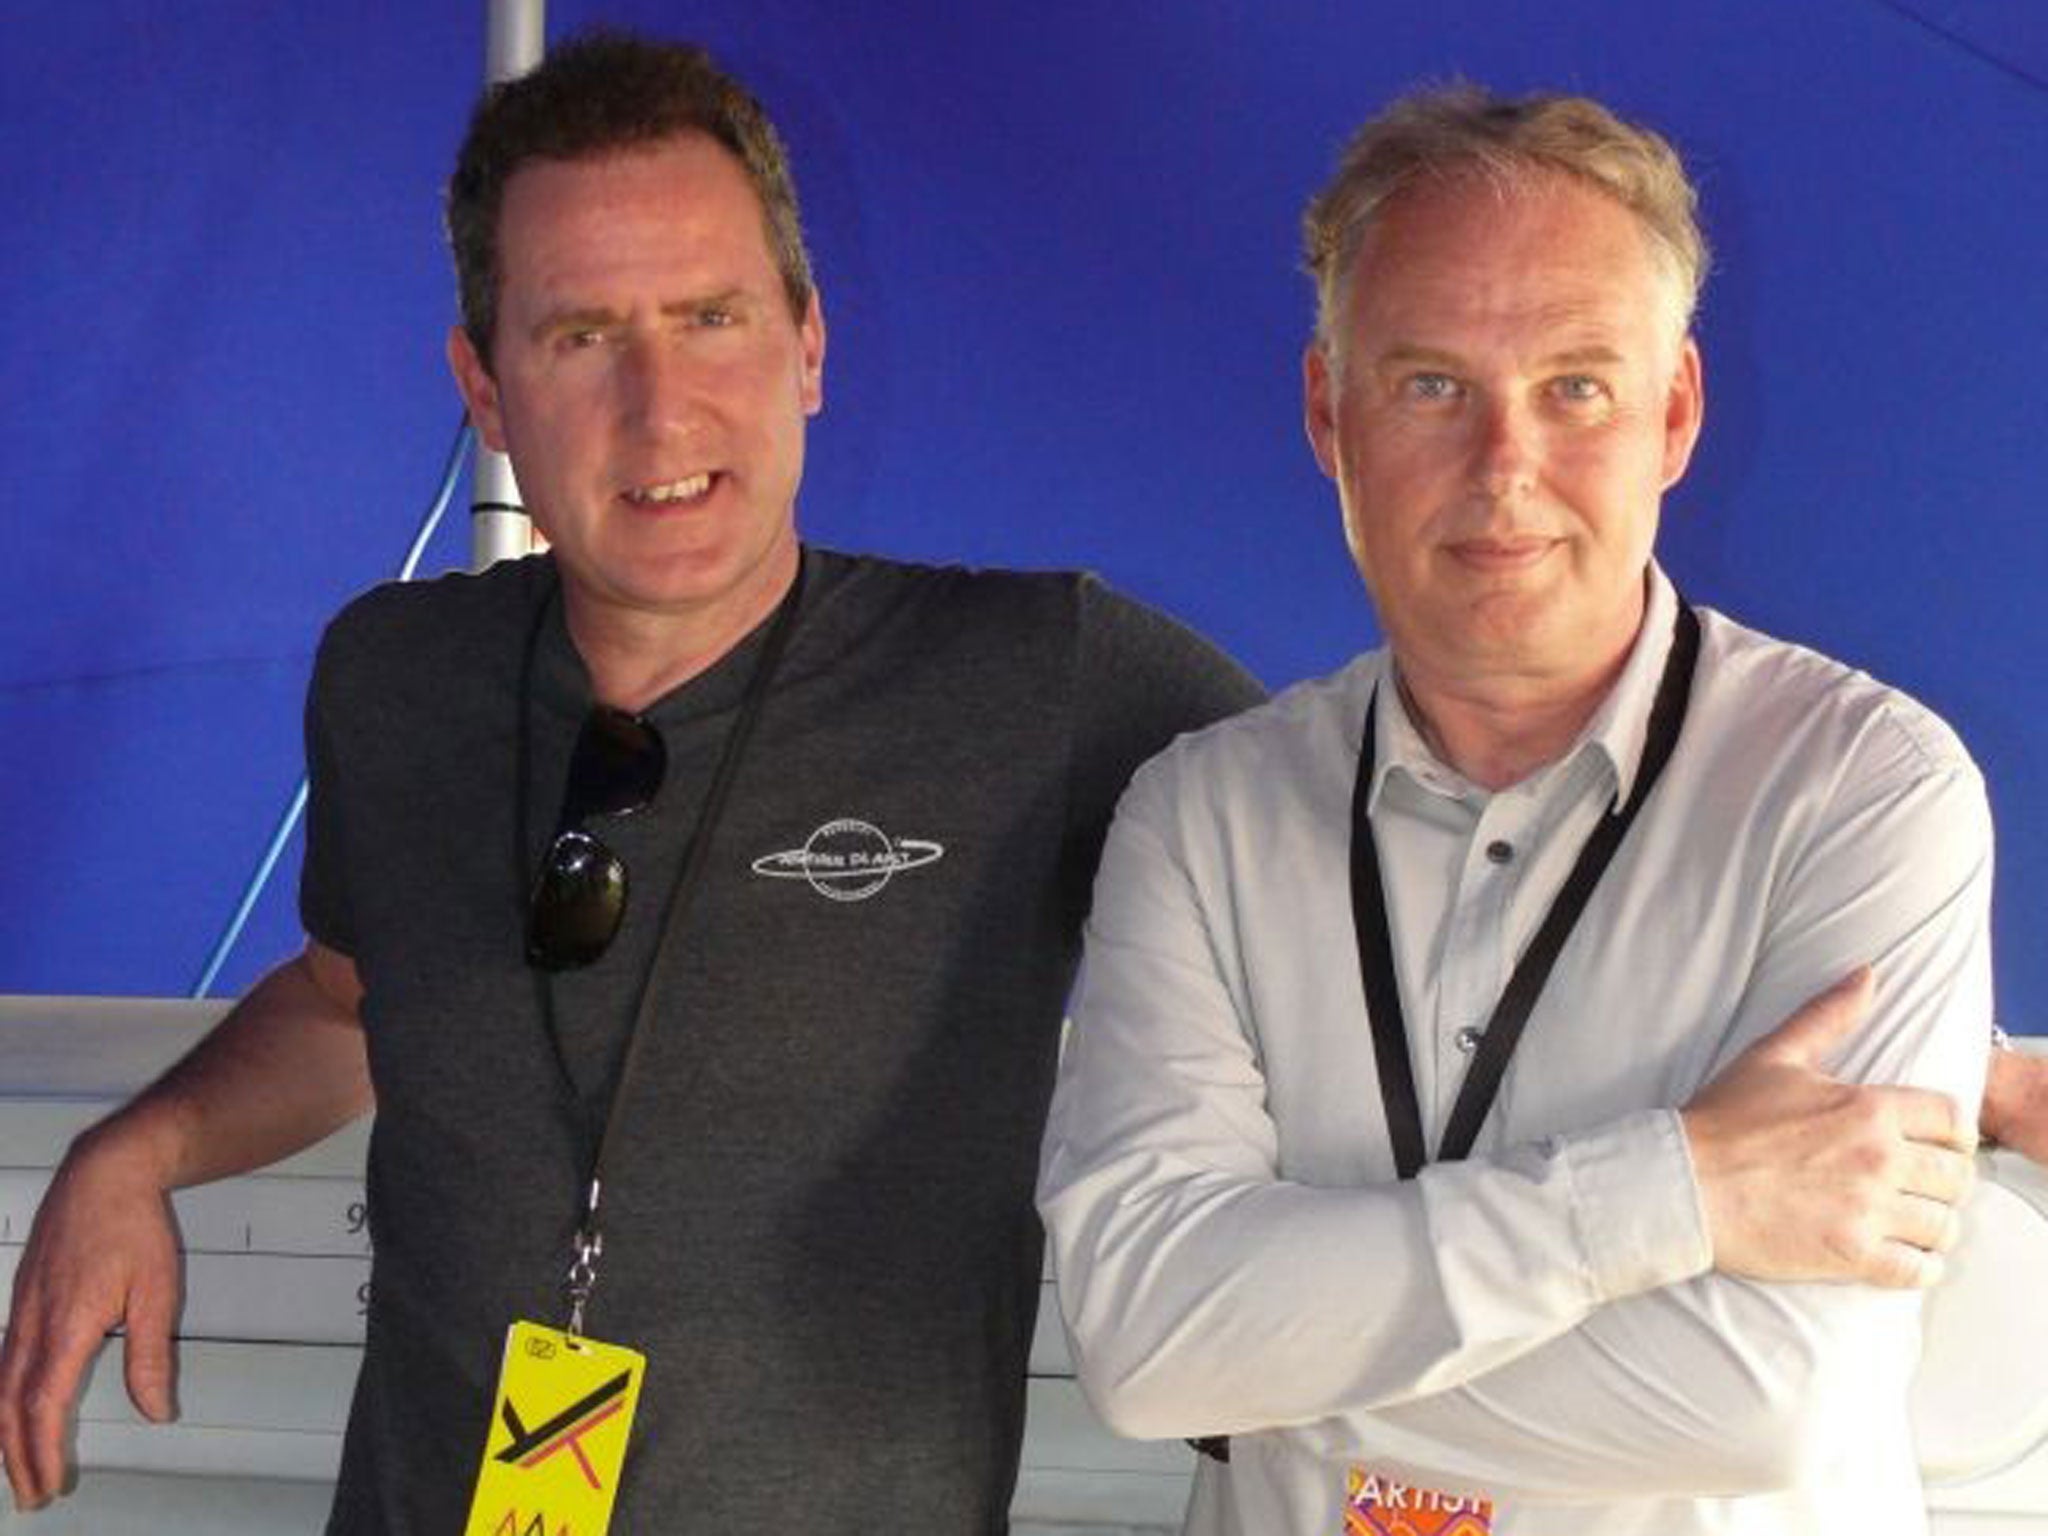 Techno wizards: Andy McCluskey and Paul Humphreys of OMD